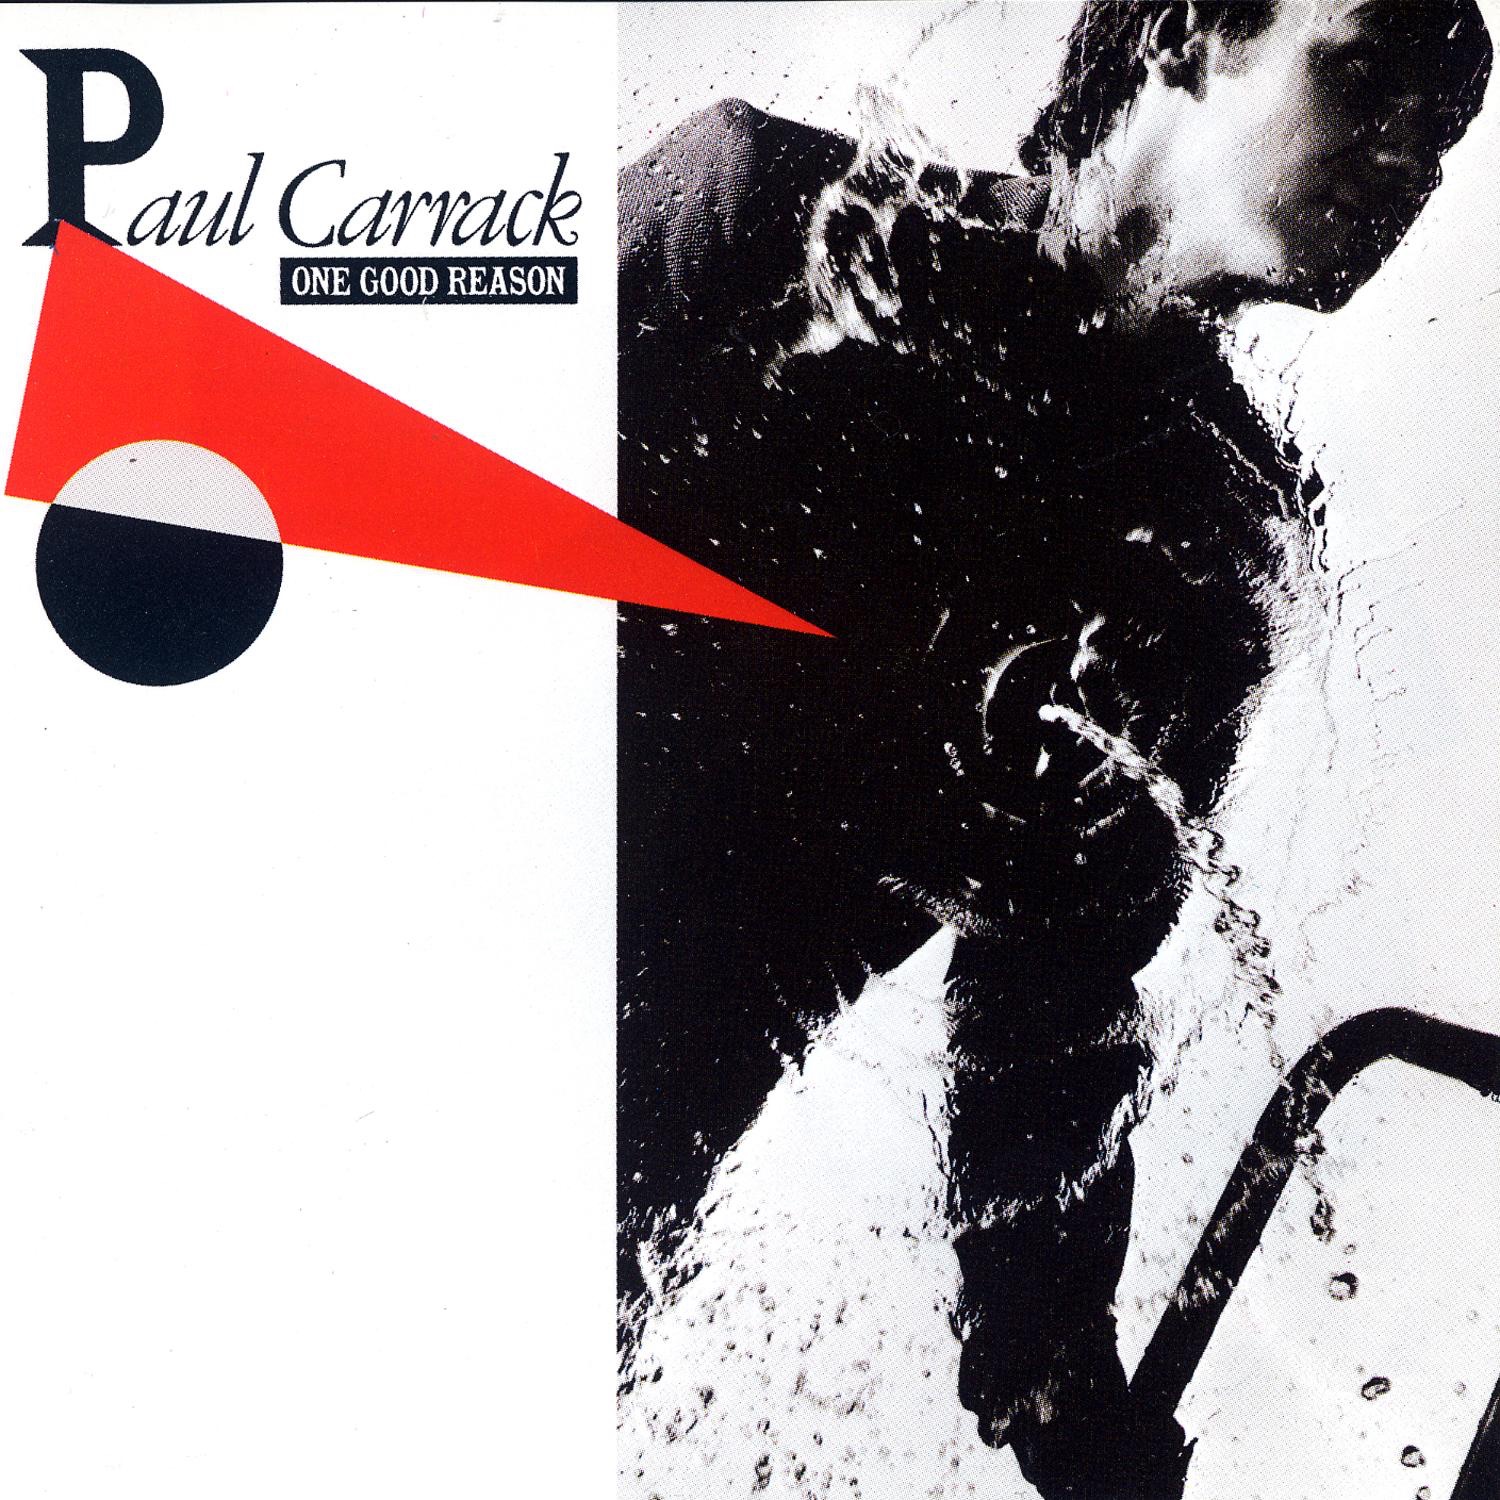 Art for Don't Shed a Tear by Paul Carrack